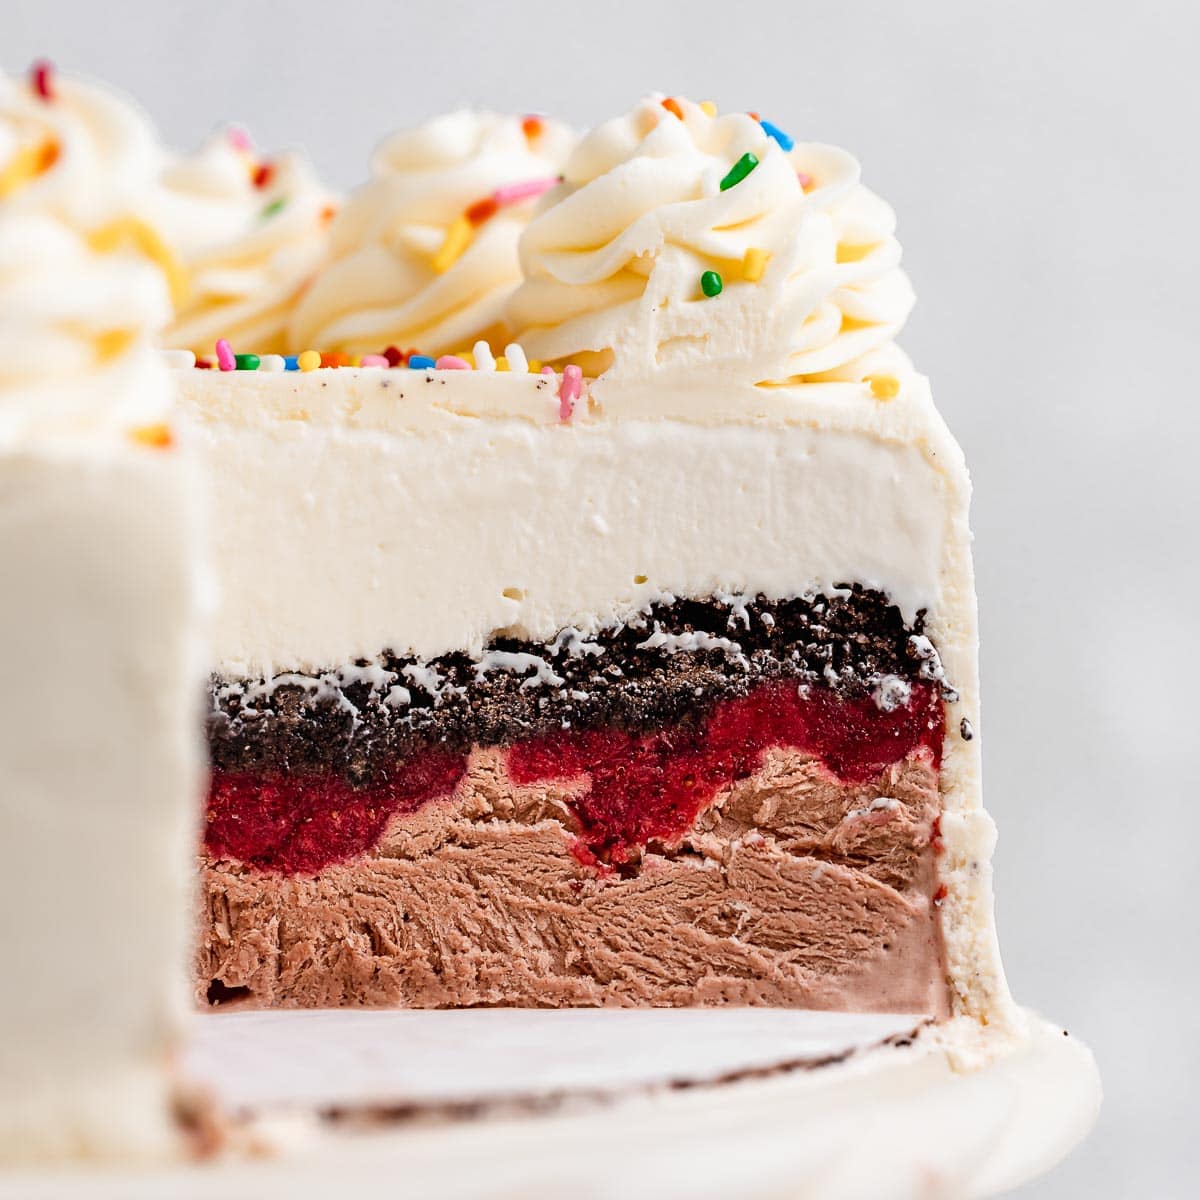 These Mini Ice Cream Cakes Are Perfect for Every Celebration